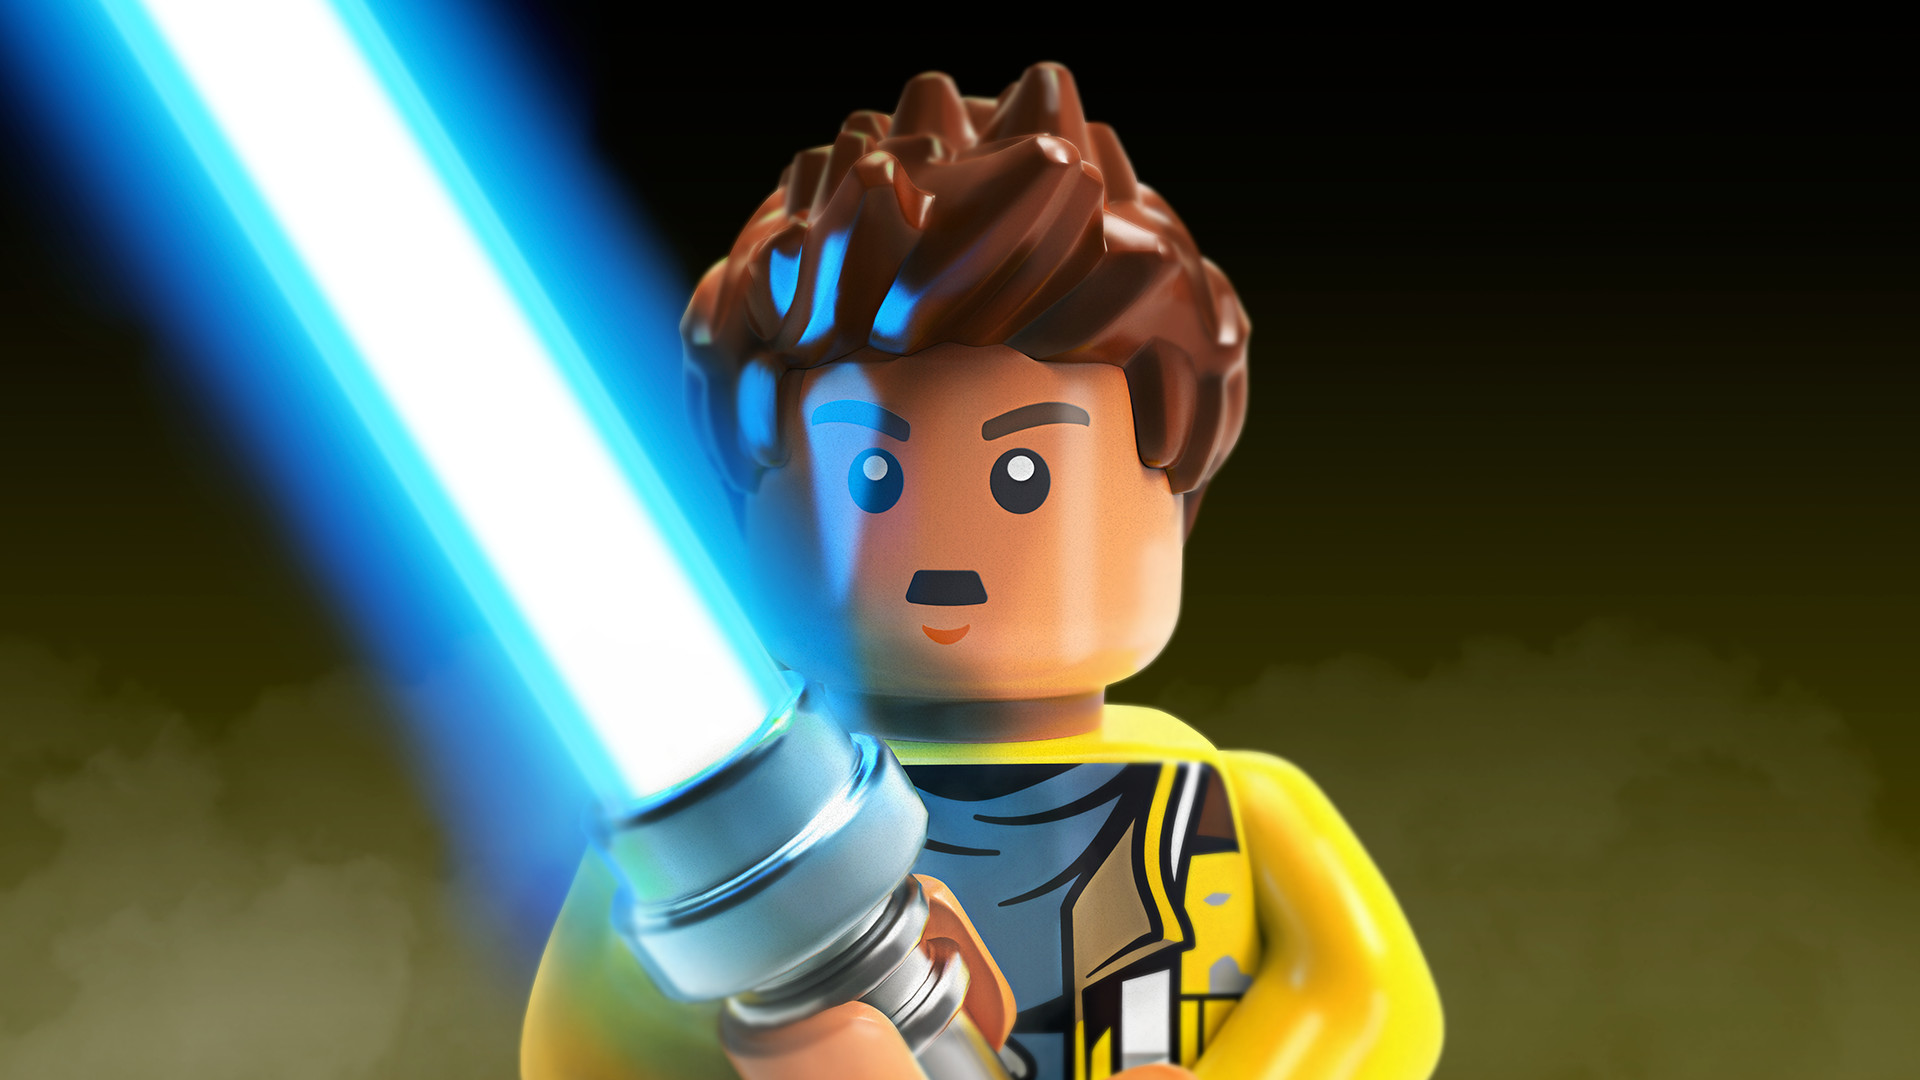 LEGO Star Wars: The Force Awakens - The Freemaker Adventures Character Pack DLC Steam CD Key, 1.68 usd